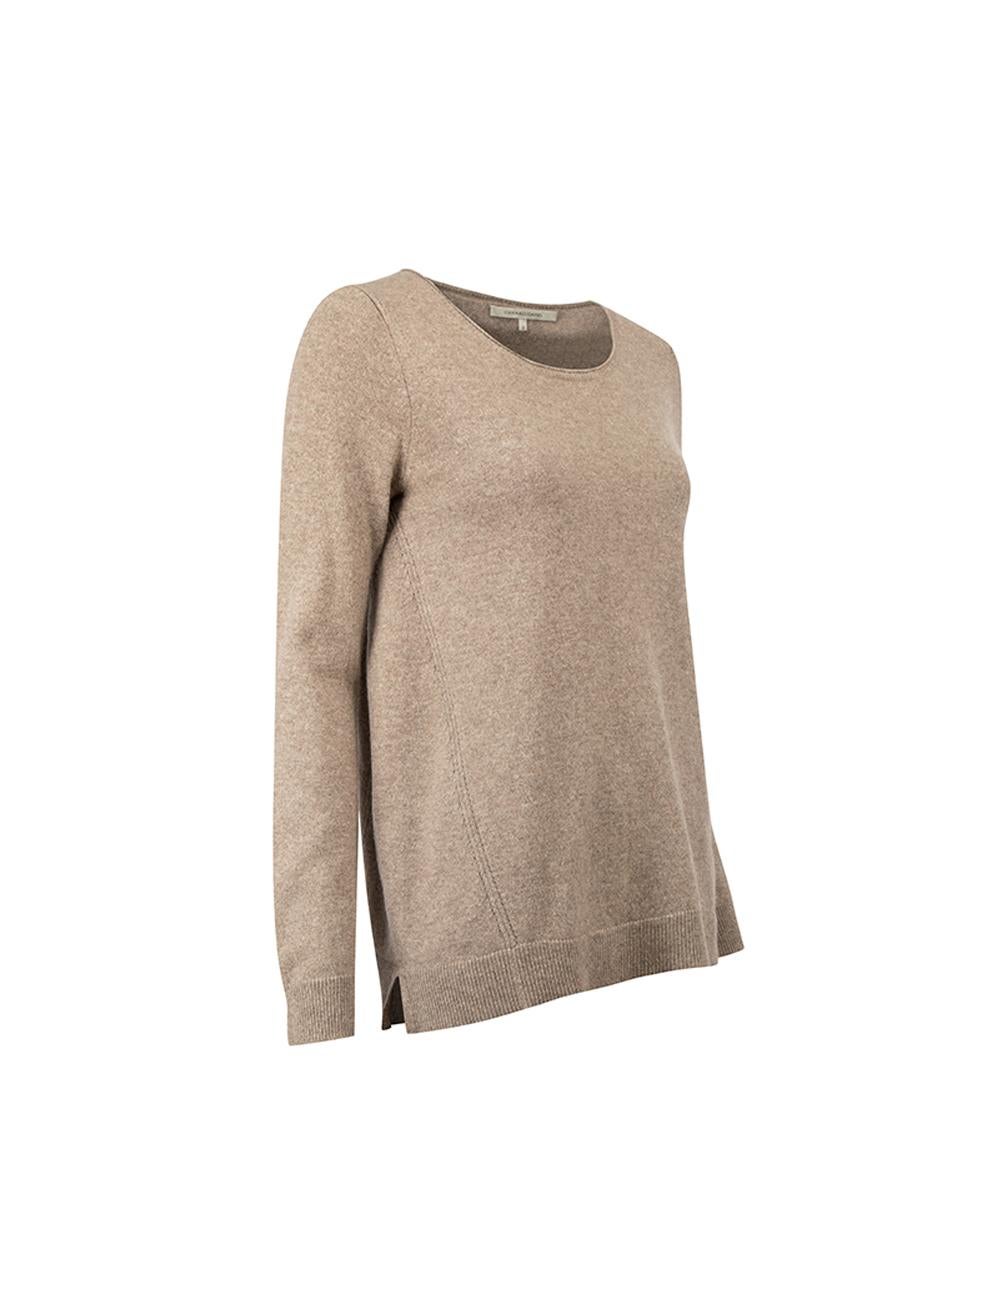 CONDITION is Very good. Hardly any visible wear to jumper is evident. a hole on the left sleeve and a hole on the right sleeve has been re-stitched on this used Gerard Darel designer resale item. 



Details


Brown

Cashmere

Long sleeves knit